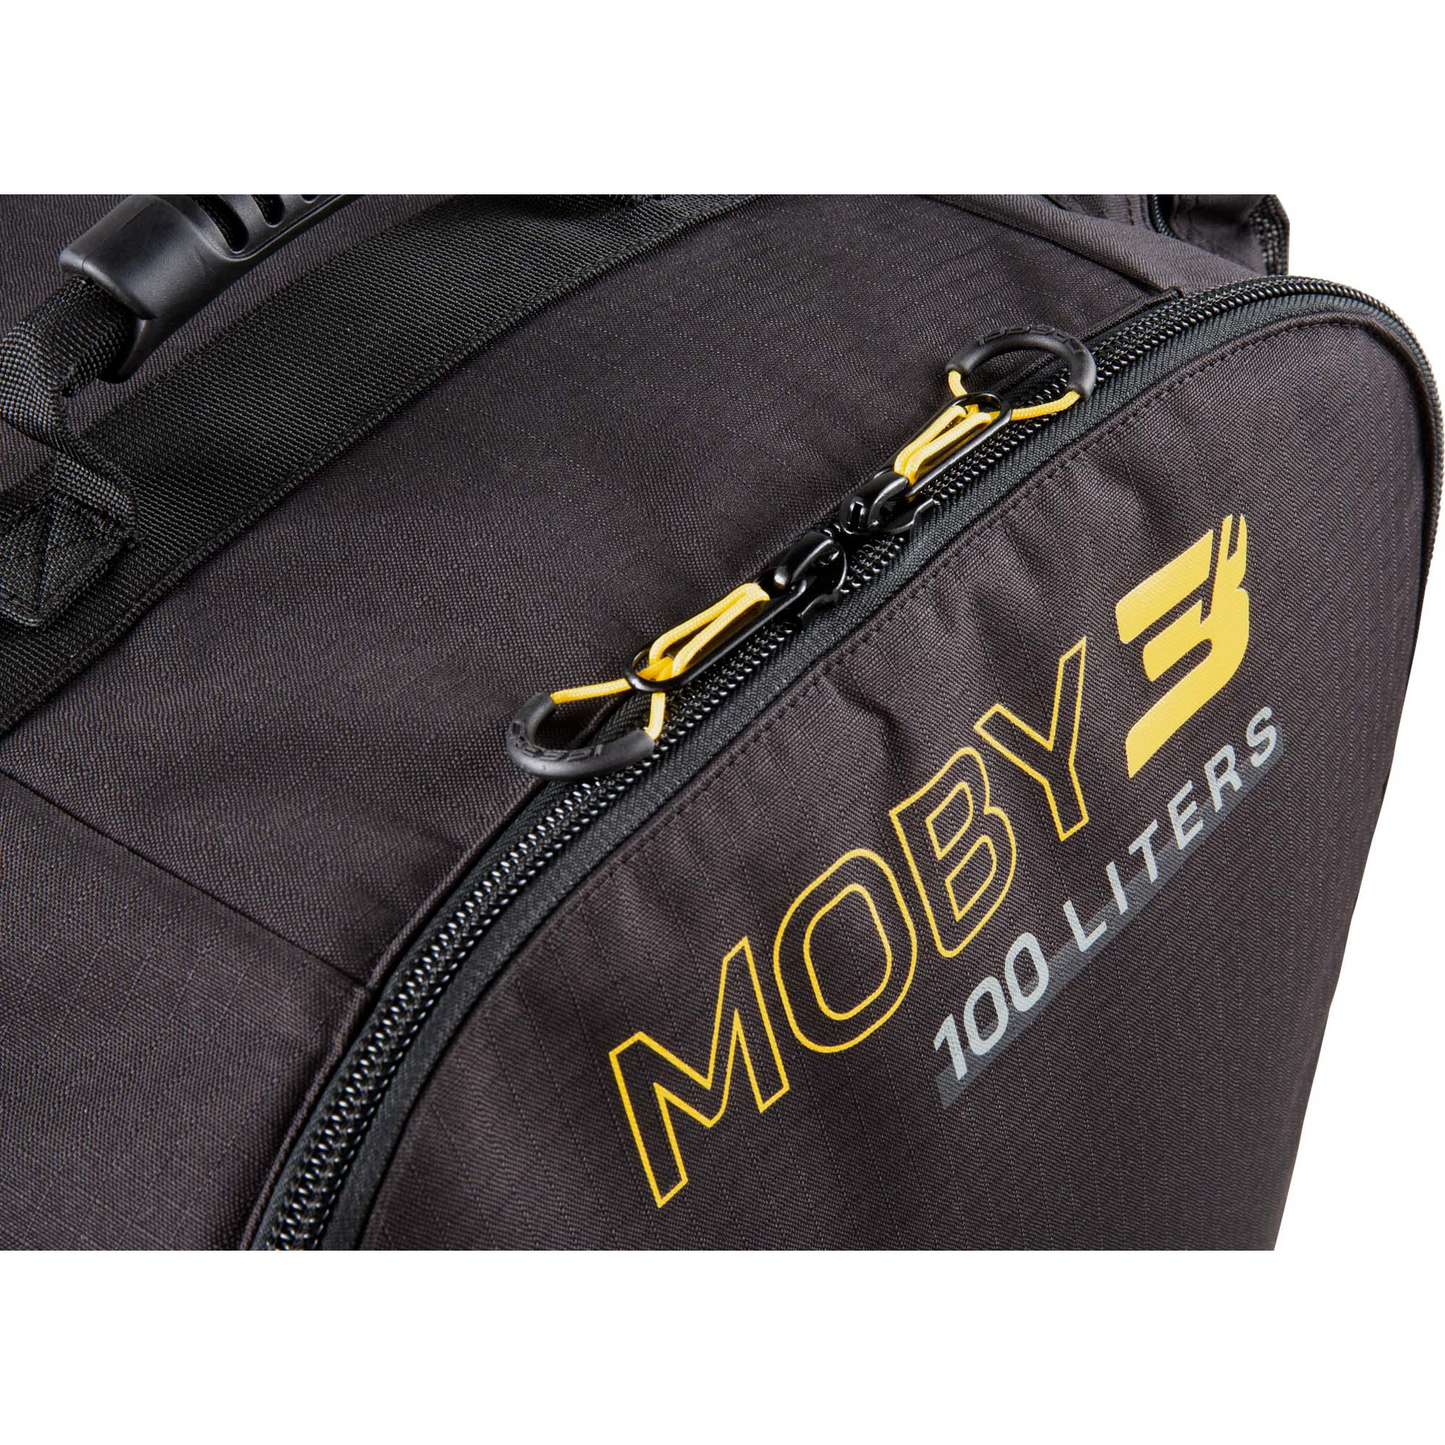 Cressi Moby 3 Trolley Bag